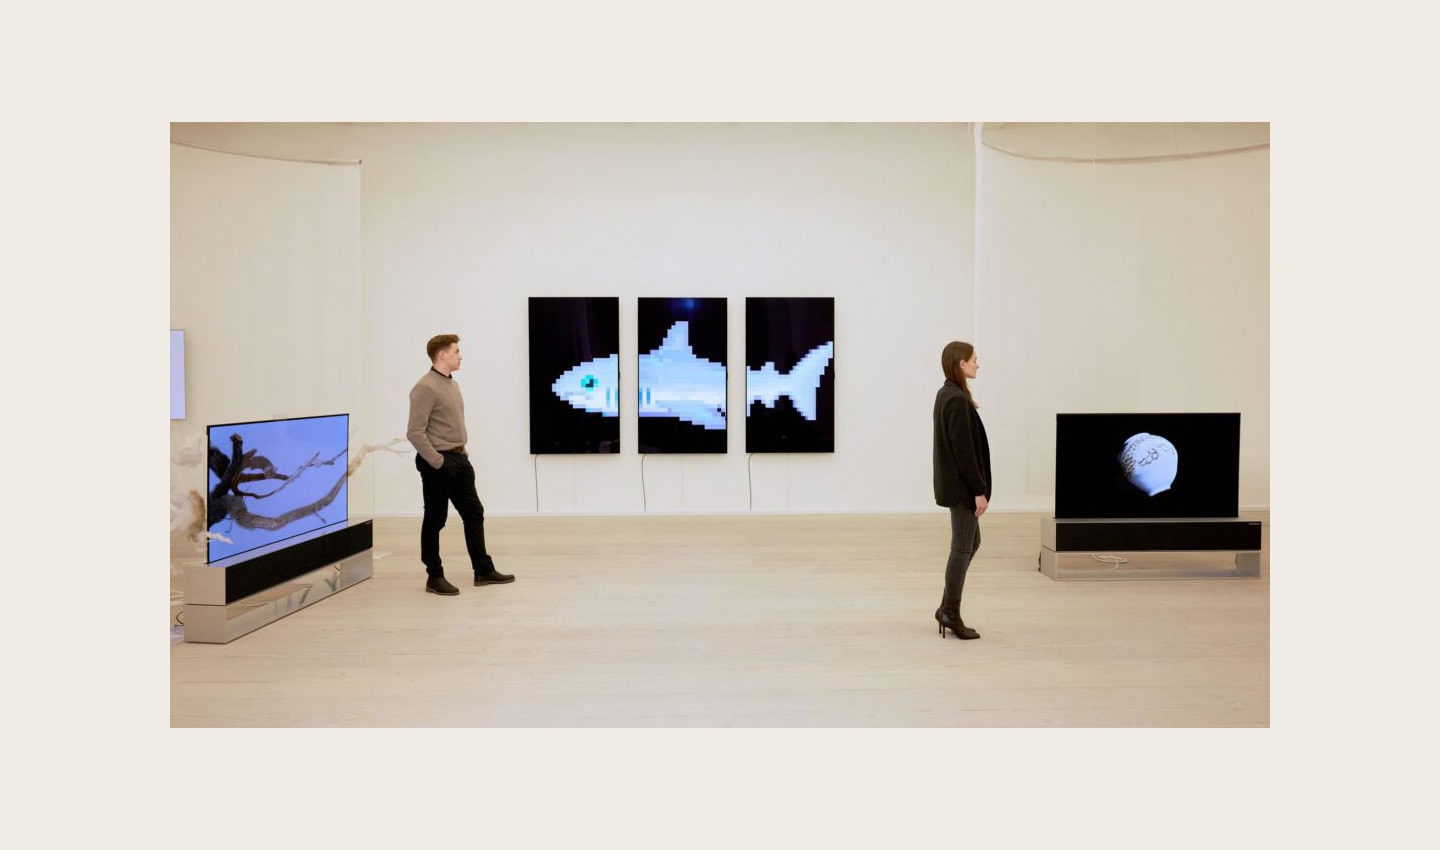 Form left, ‘The Warm Tree’ by Ruofan Chen, ‘THE S/H/A/R/K’ by Damien Hirst and ‘The Moment & Morpho Luna’ by Je Baak displayed on LG OLED TVs at Saatchi Gallery